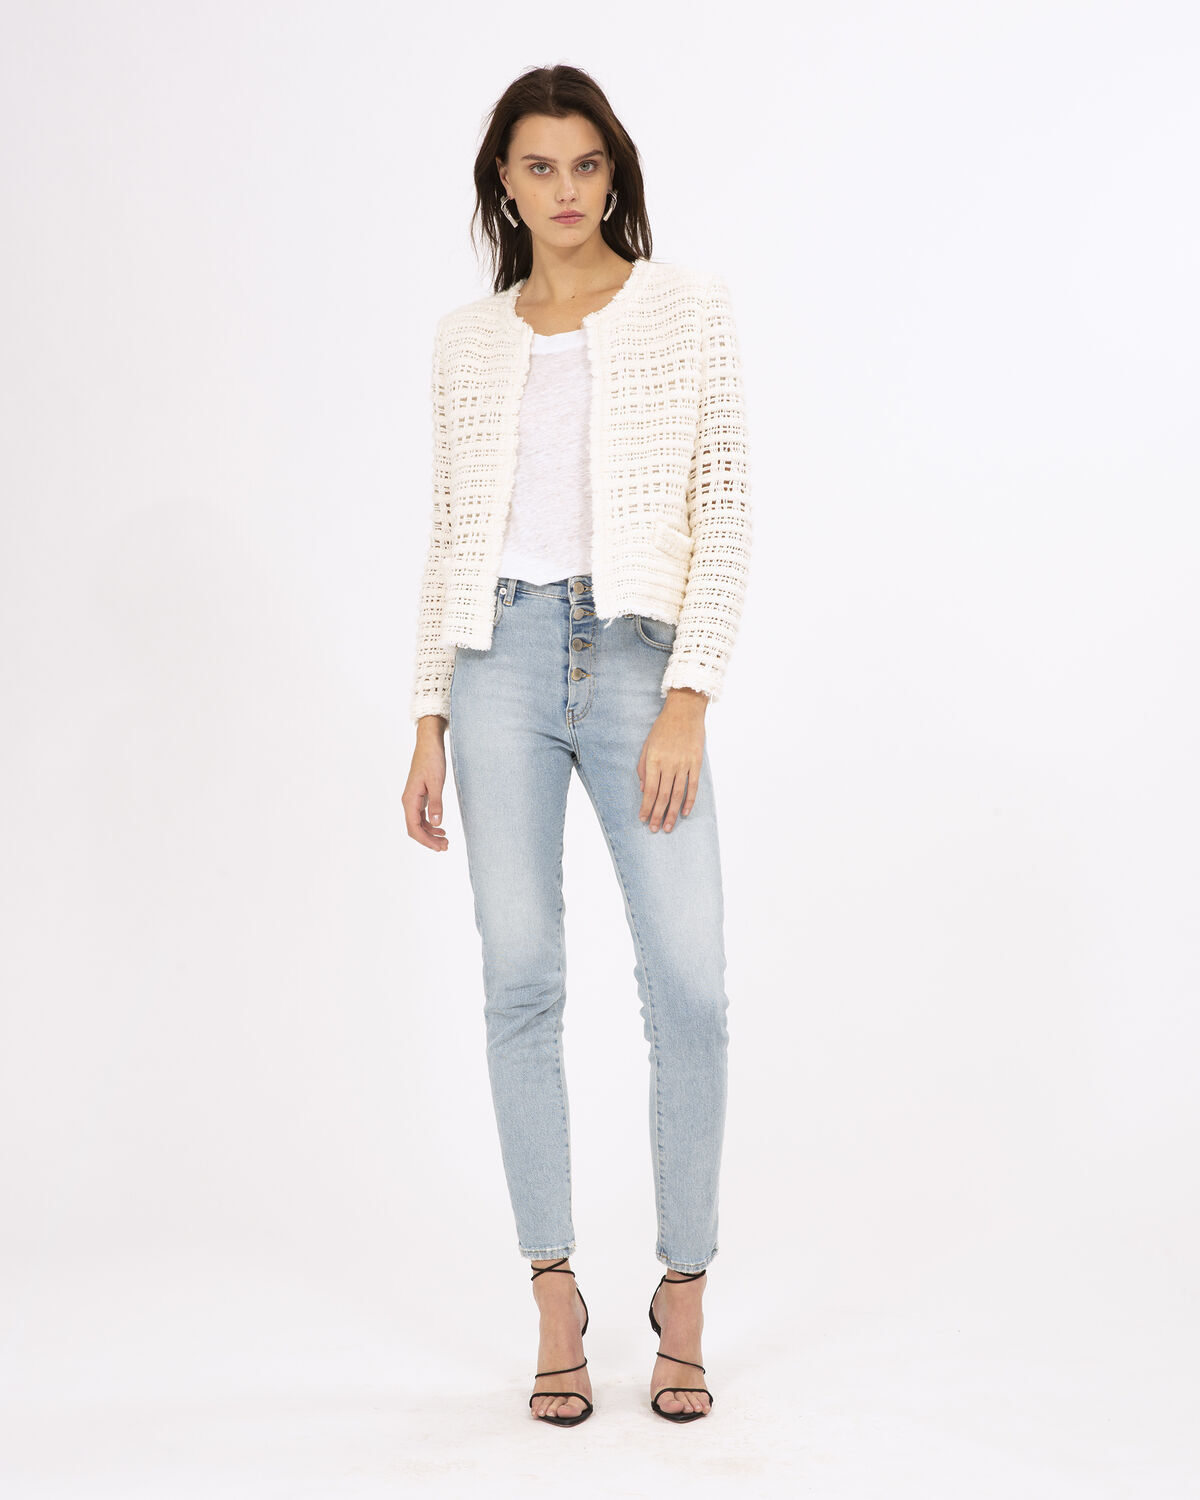 Photo of IRO Paris Startle Jacket Ecru - This Season, Iro Revisits The Tweed Jacket And Offers A Resolutely Modern Version. Its Long Openwork Sleeves And Frayed Details Will Perfectly Match Jeans And A Pair Of High Sandals. Spring Summer 19